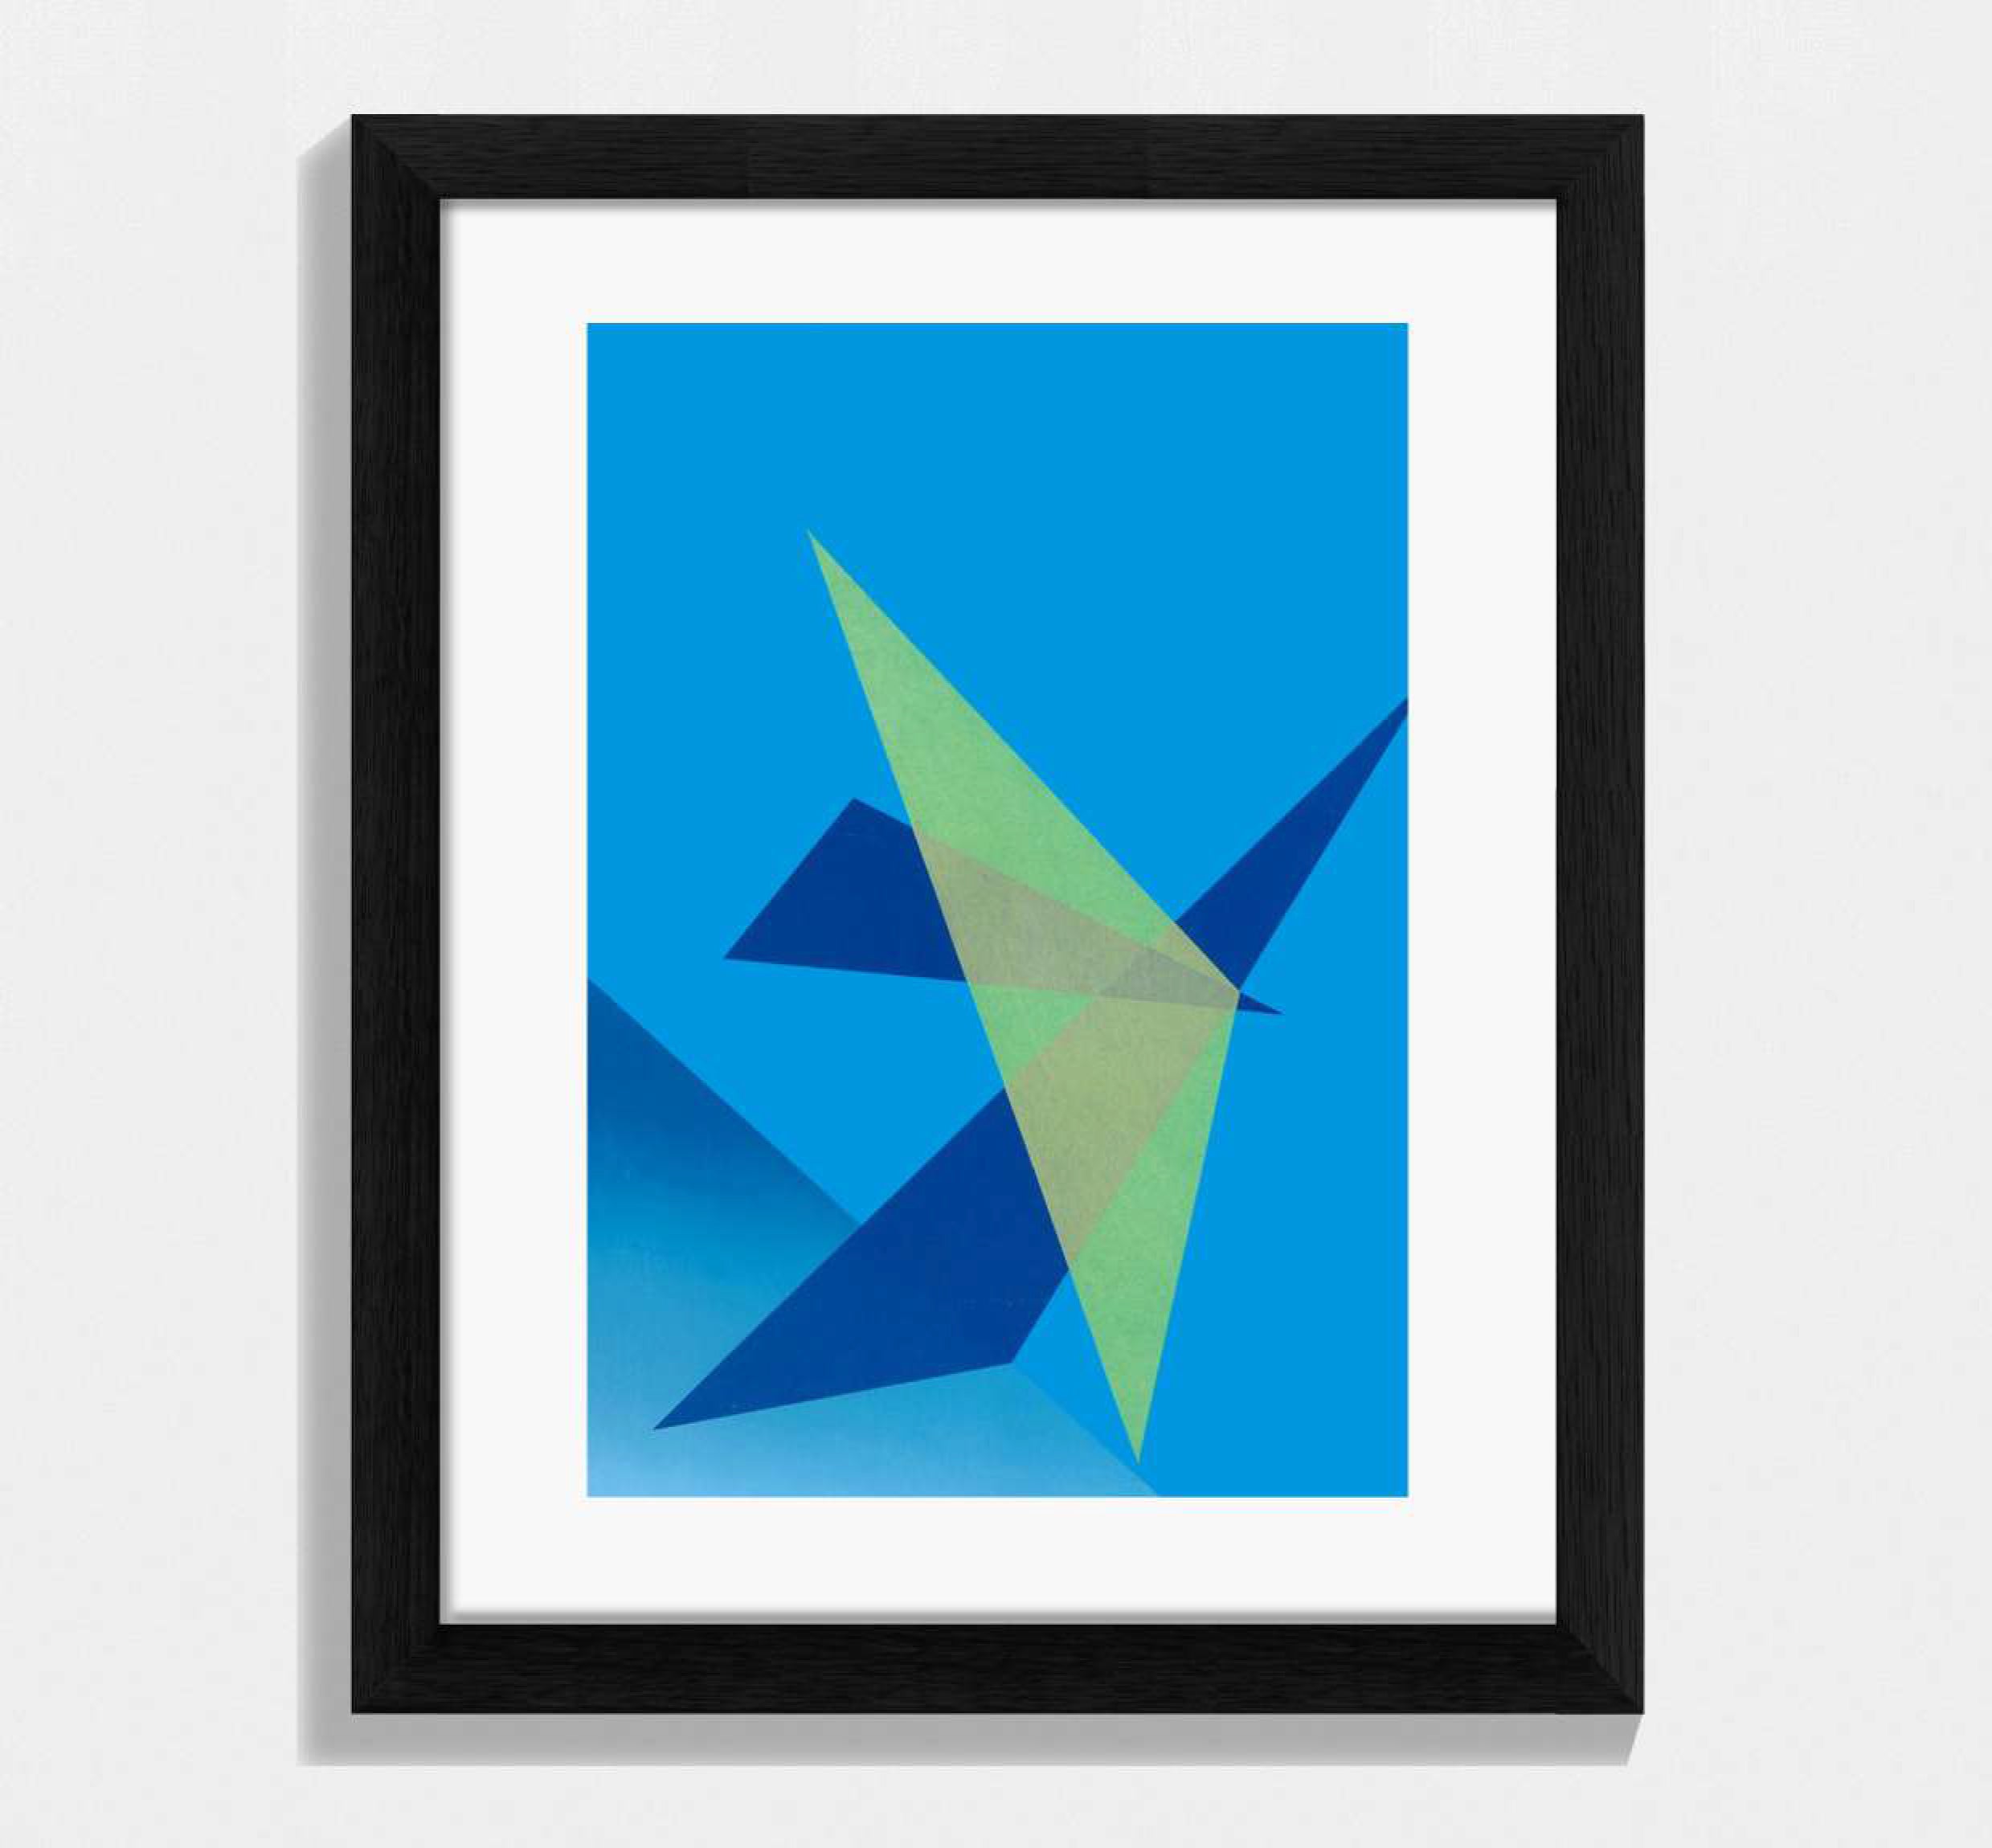 framed blue and yellow geometric shaped print